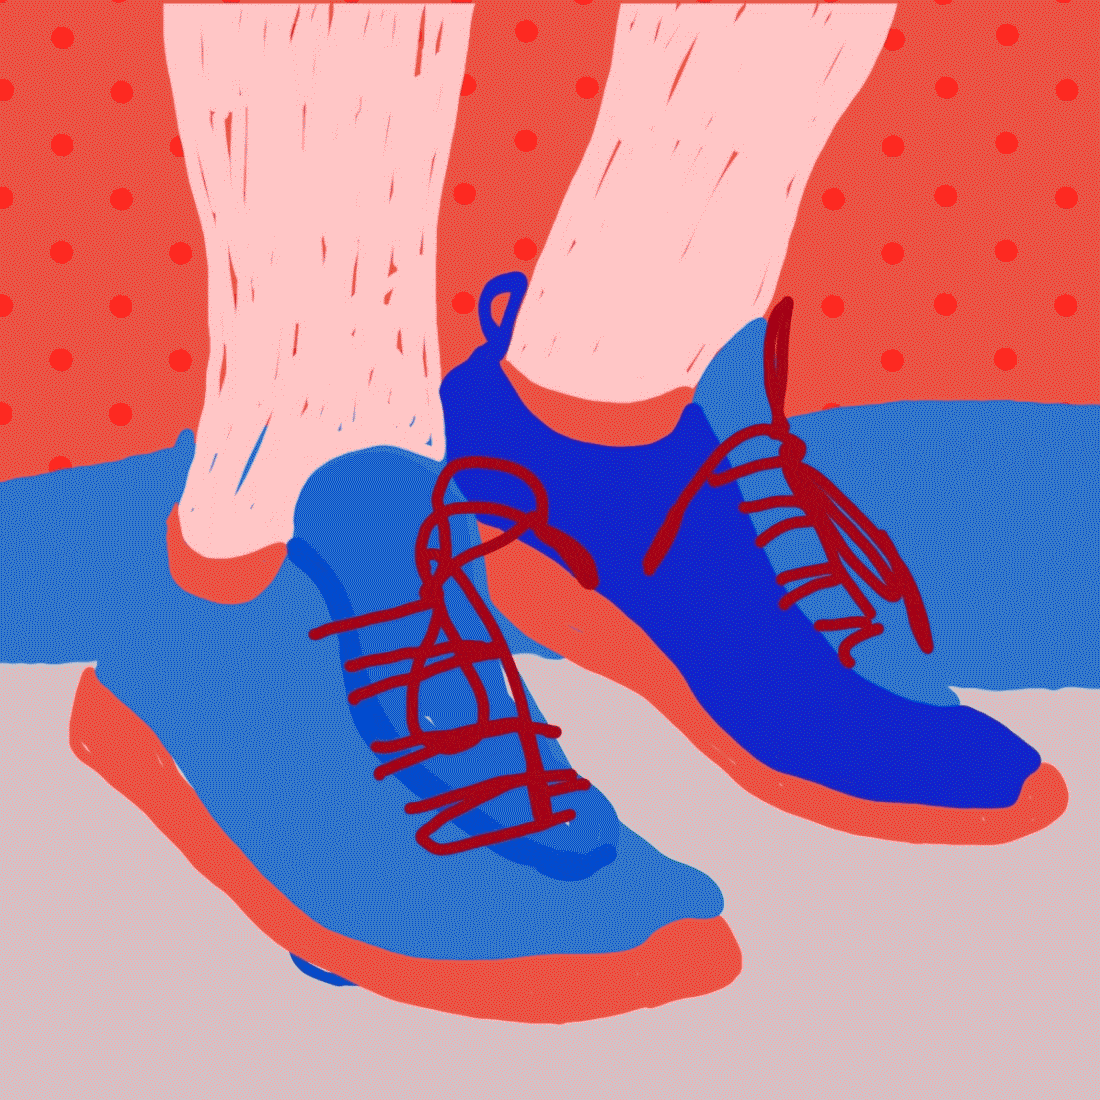 animation gifs on sport and leisure by sylwia kubus